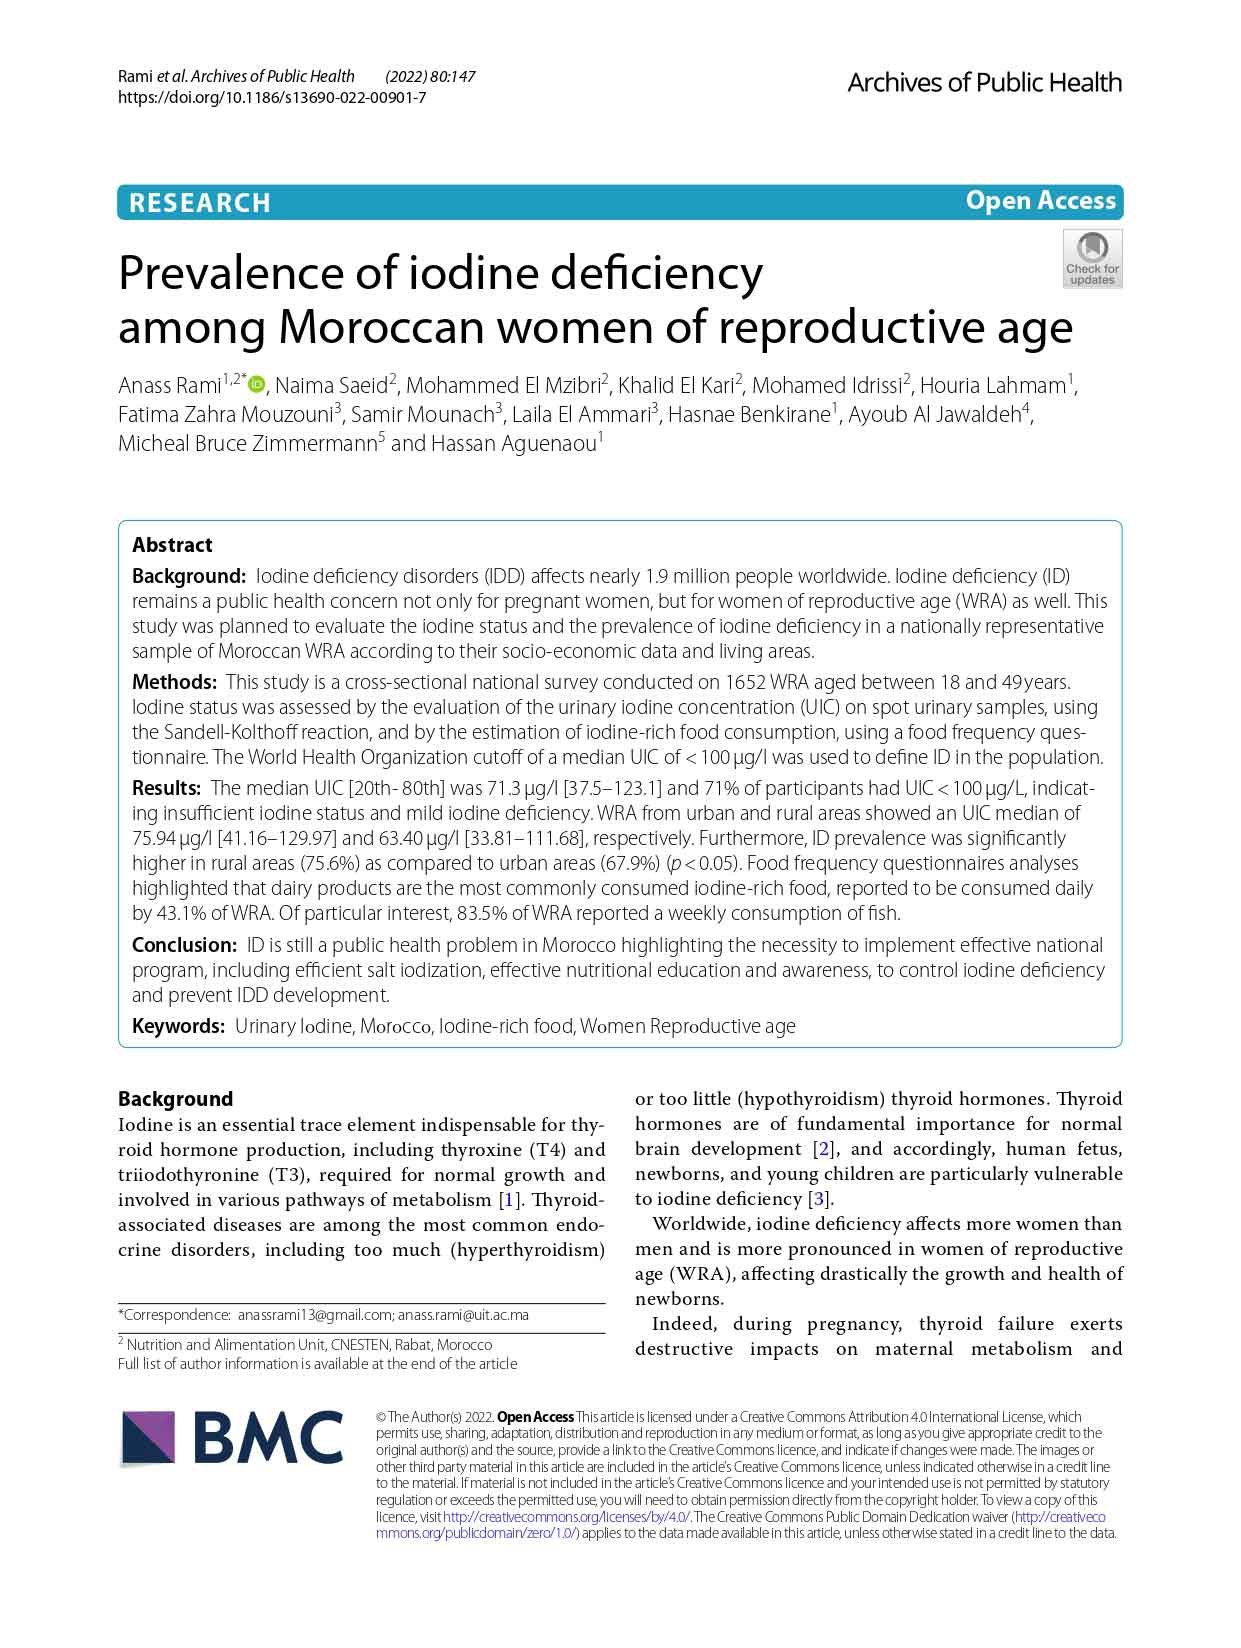 Prevalence of iodine deficiency among Moroccan women of reproductive age